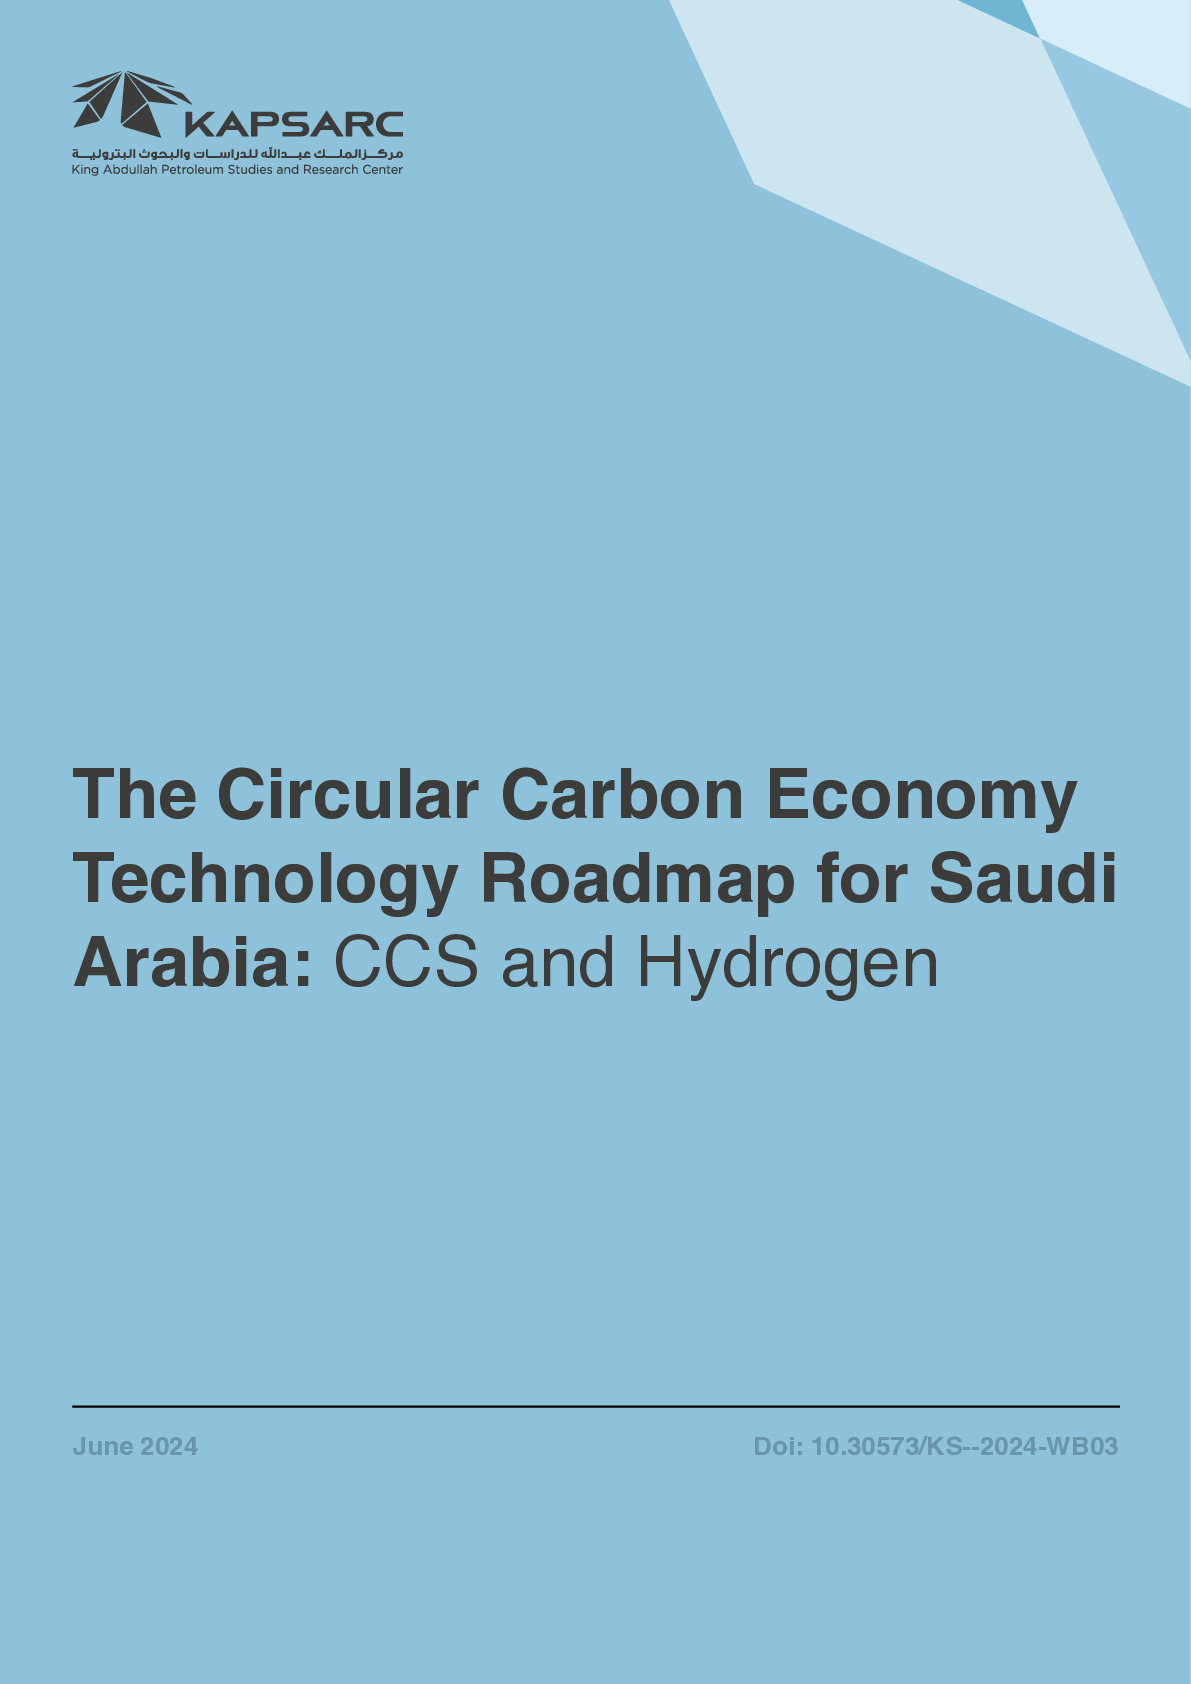 The Circular Carbon Economy Technology Roadmap for Saudi Arabia: CCS and Hydrogen